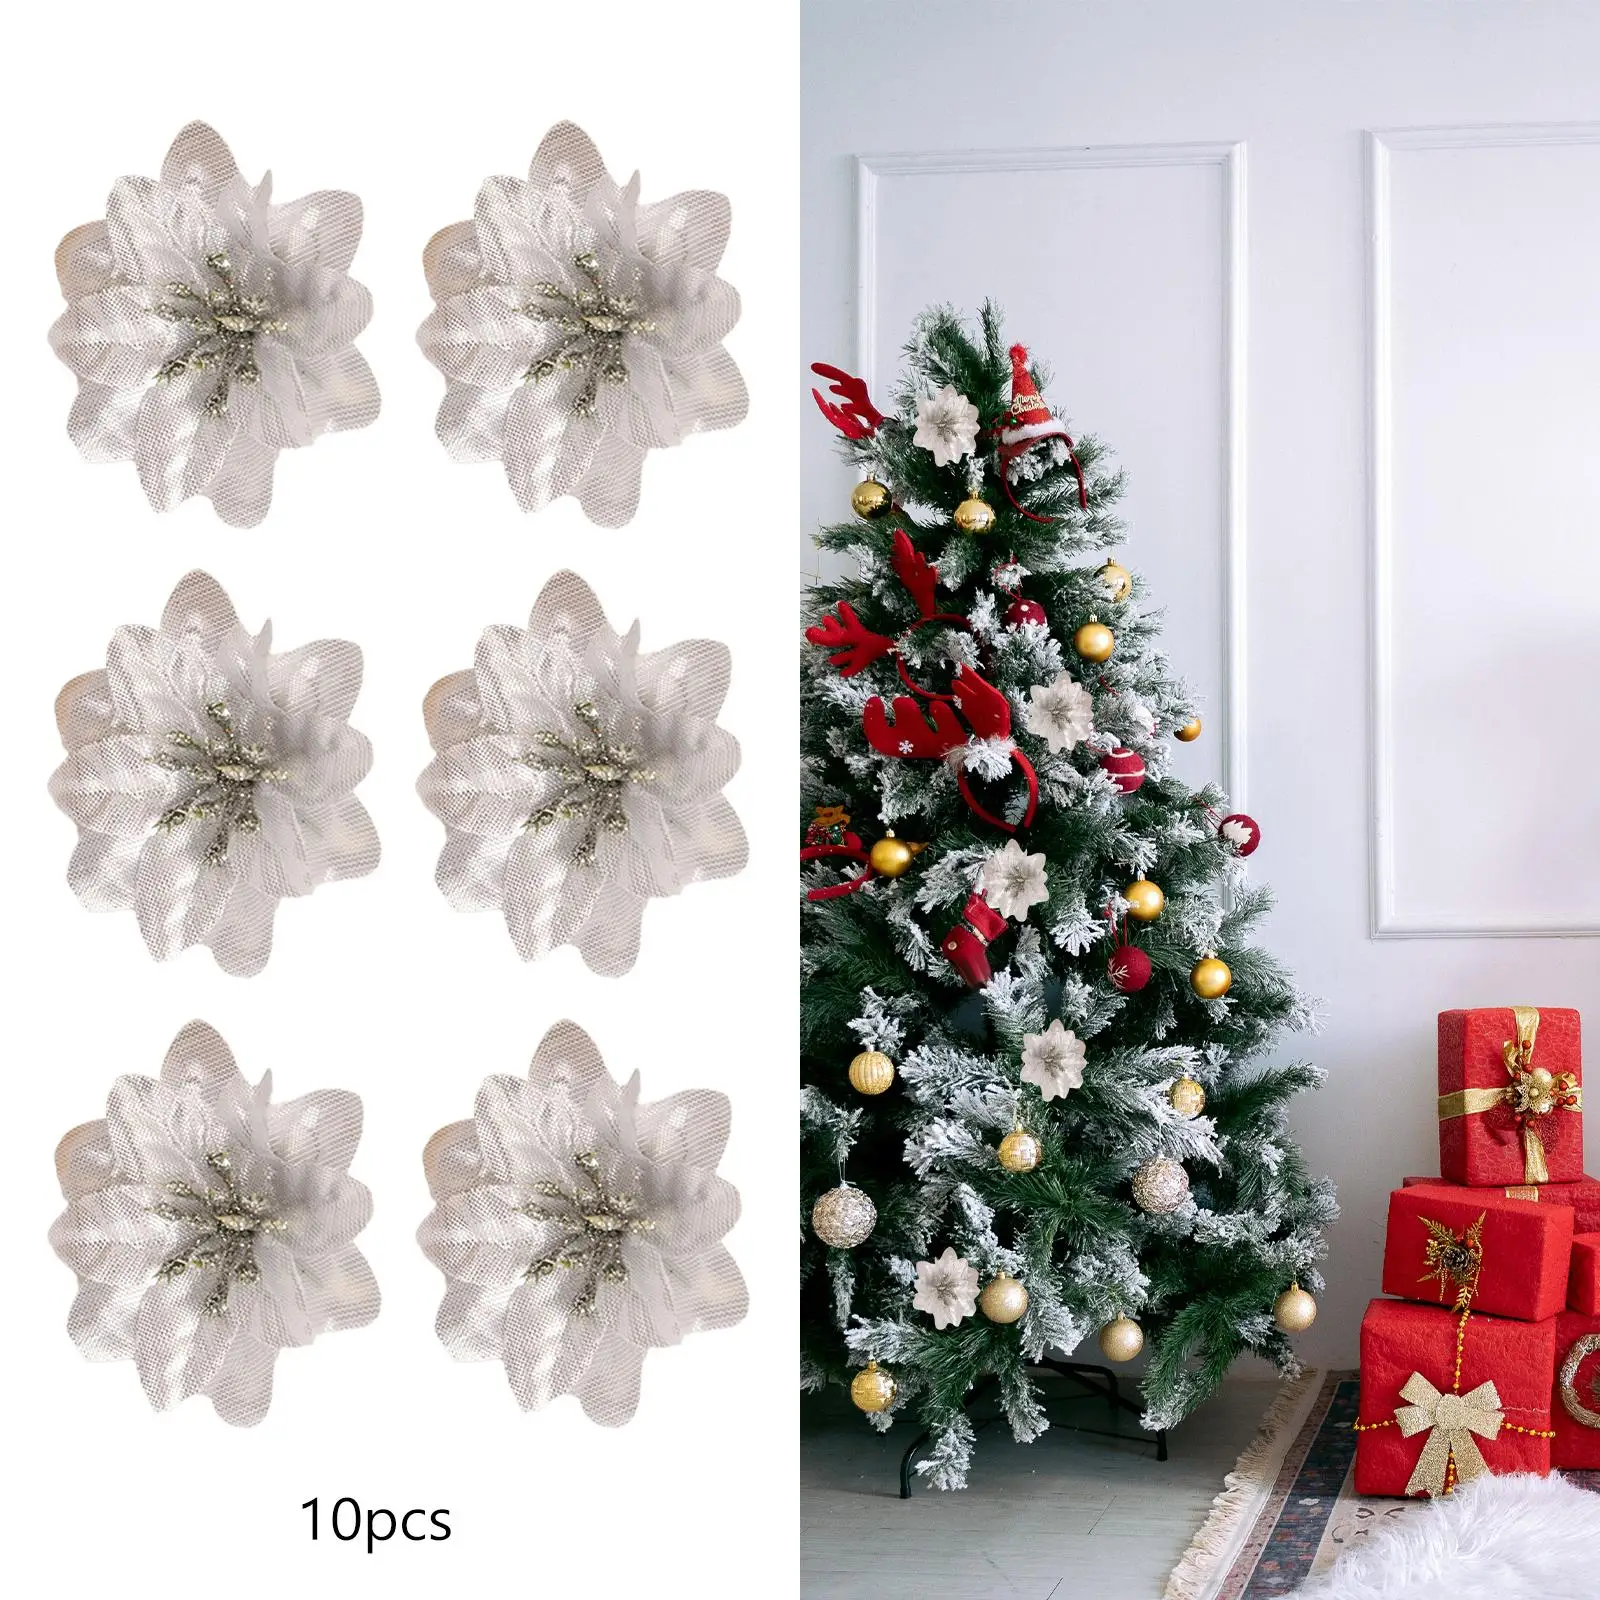 10Pcs Glitter Christmas Flowers Artificial Flowers Christmas Tree Decoration Xmas Tree Ornaments for New Year Garland DIY Wreath